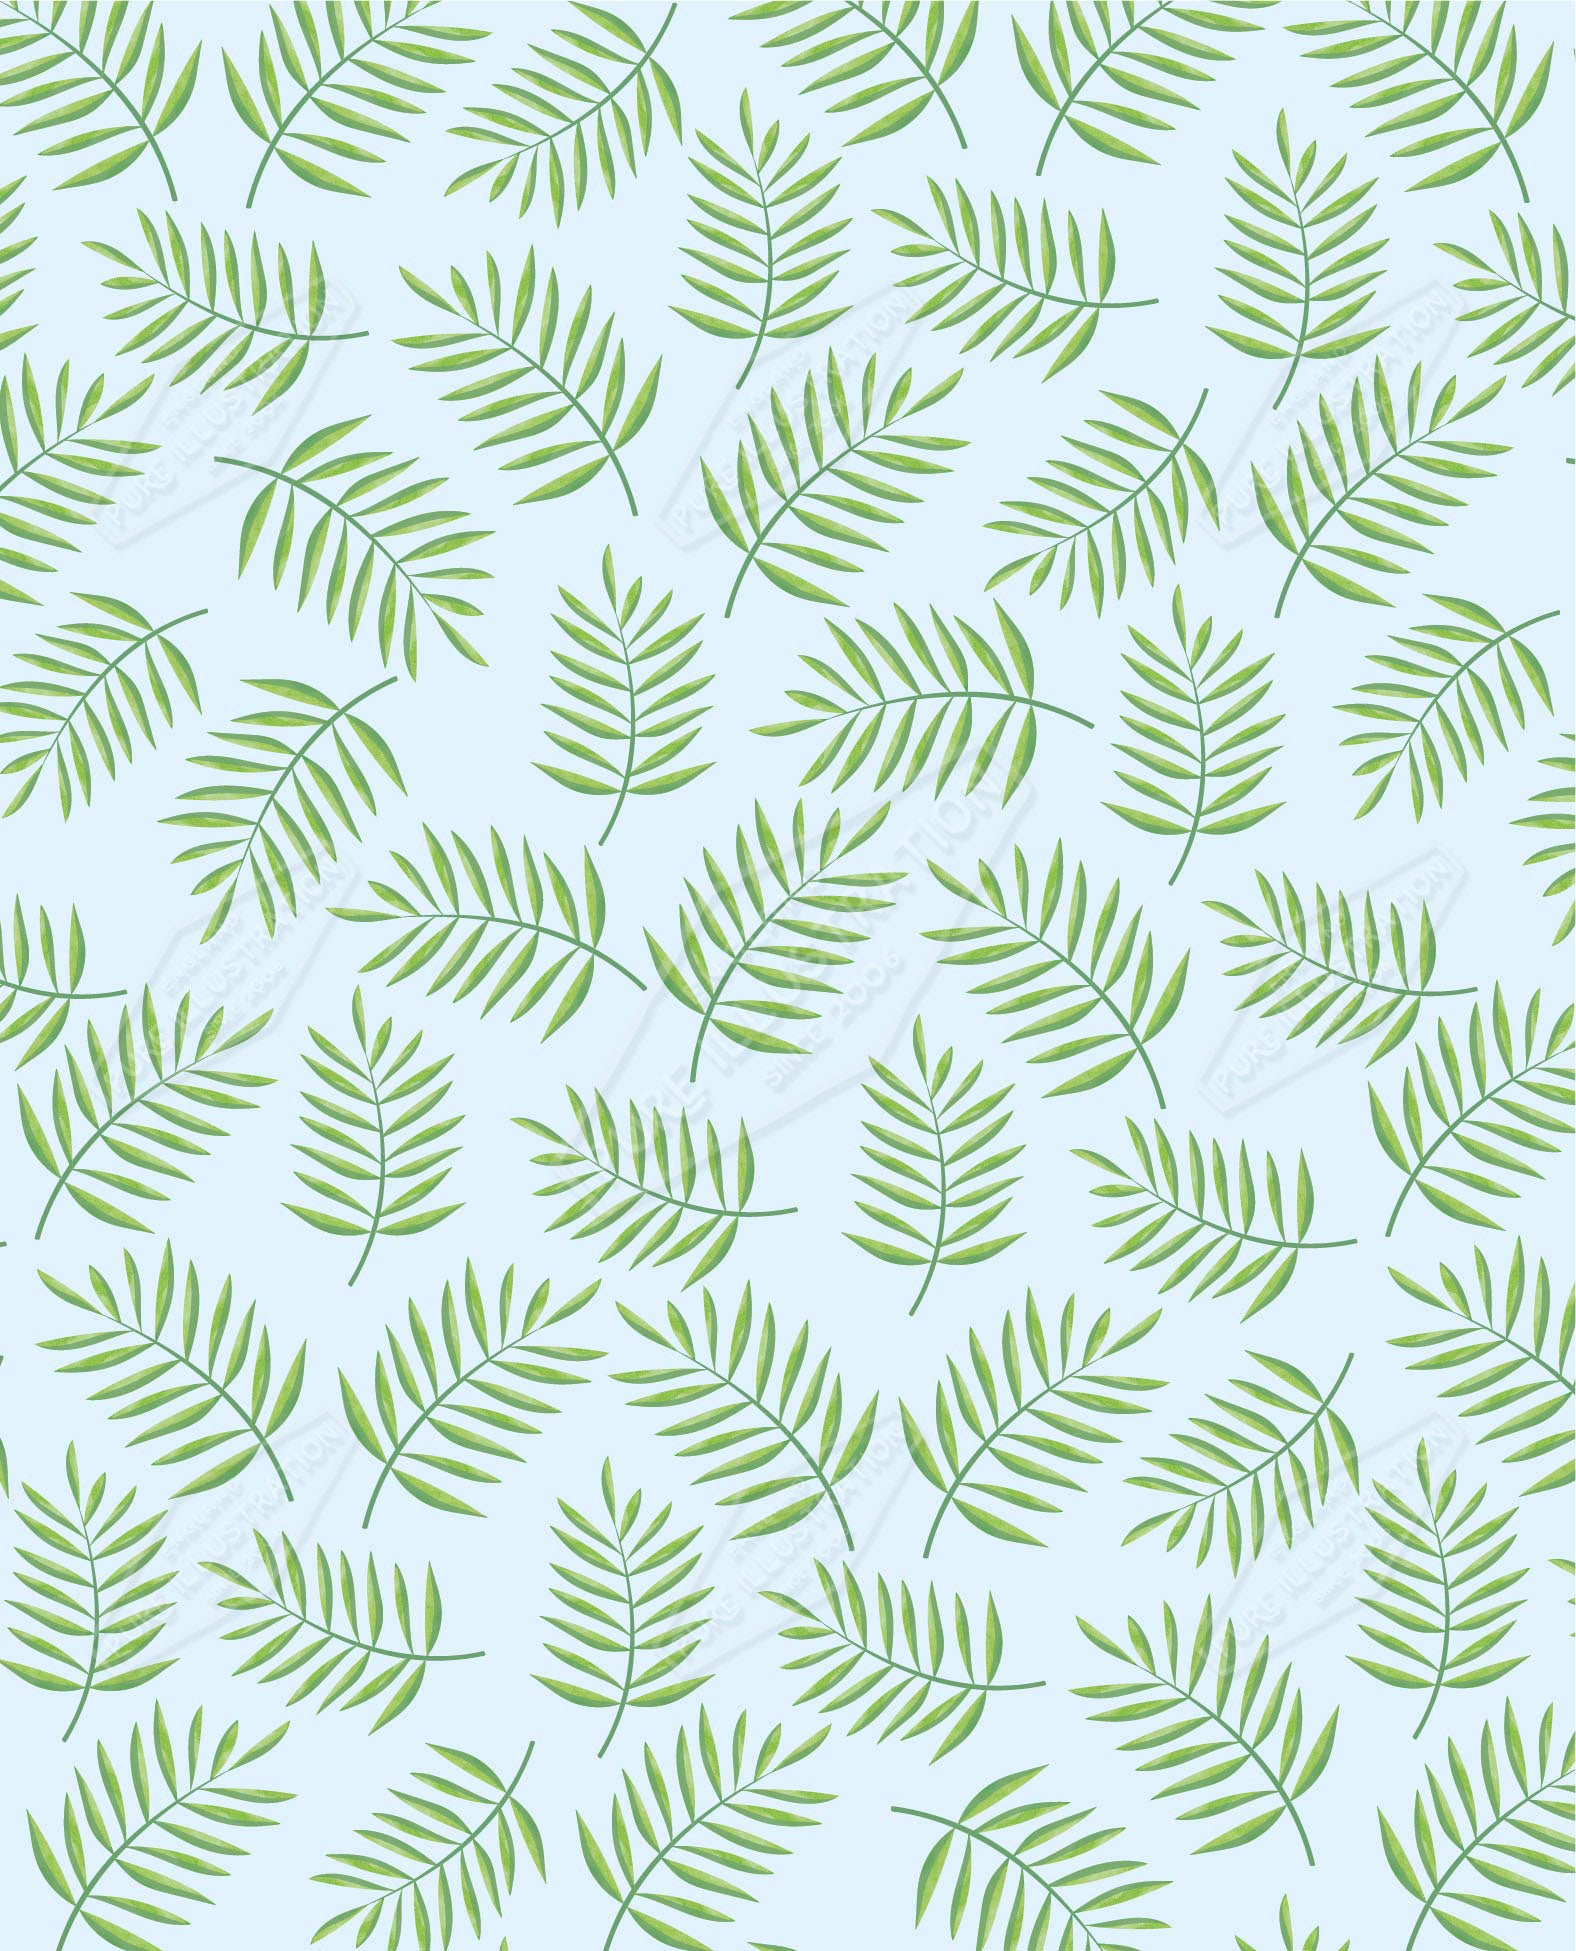 00035123SPI- Sarah Pitt is represented by Pure Art Licensing Agency - Everyday Pattern Design